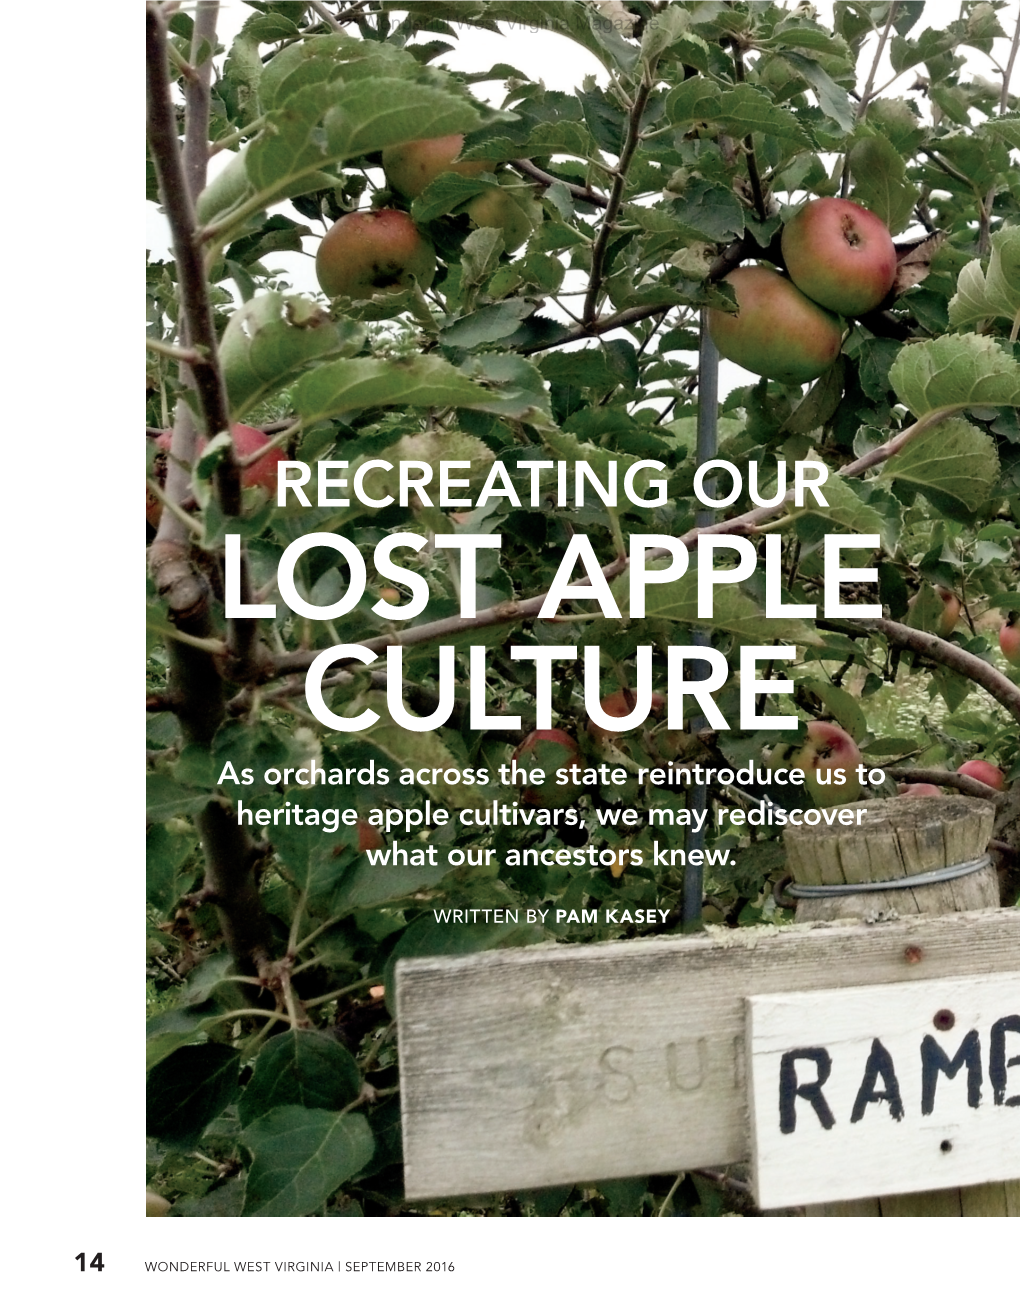 RECREATING OUR LOST APPLE CULTURE As Orchards Across the State Reintroduce Us to Heritage Apple Cultivars, We May Rediscover What Our Ancestors Knew